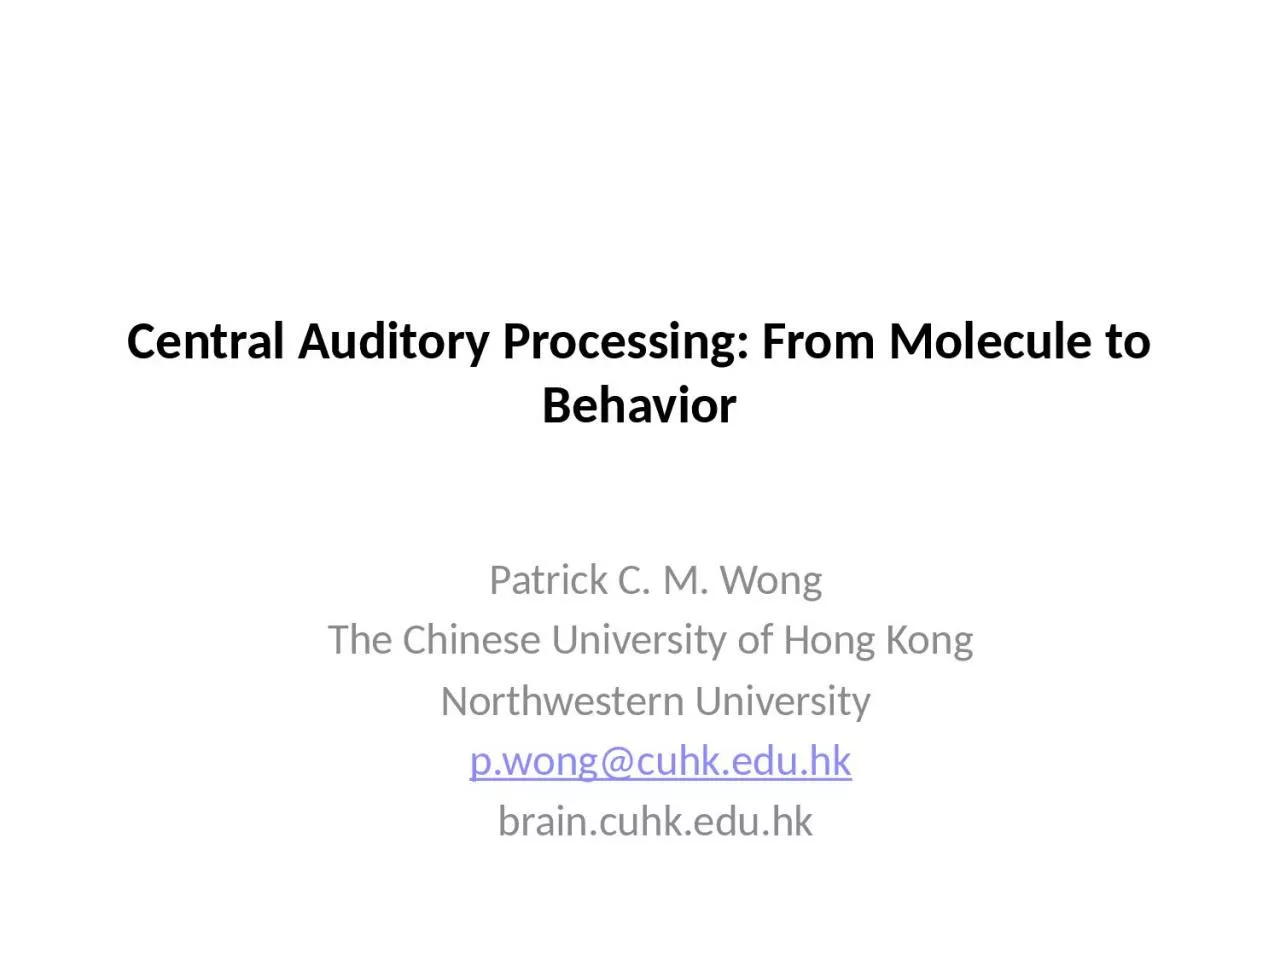 Central Auditory Processing: From Molecule to Behavior